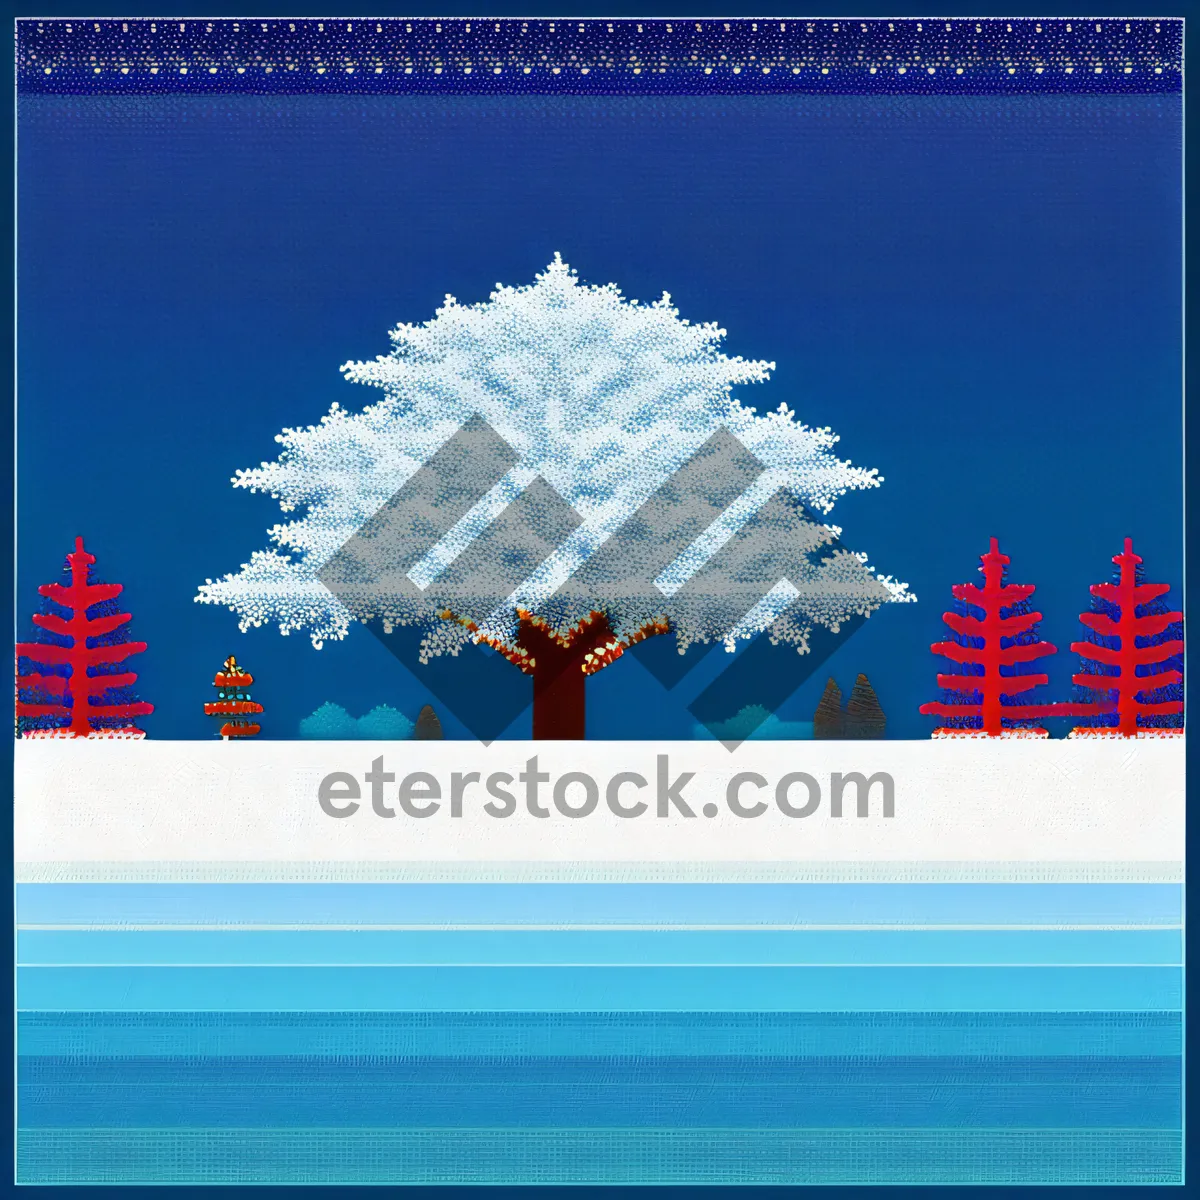 Picture of Festive Winter Stationery with Snowy Tree Design